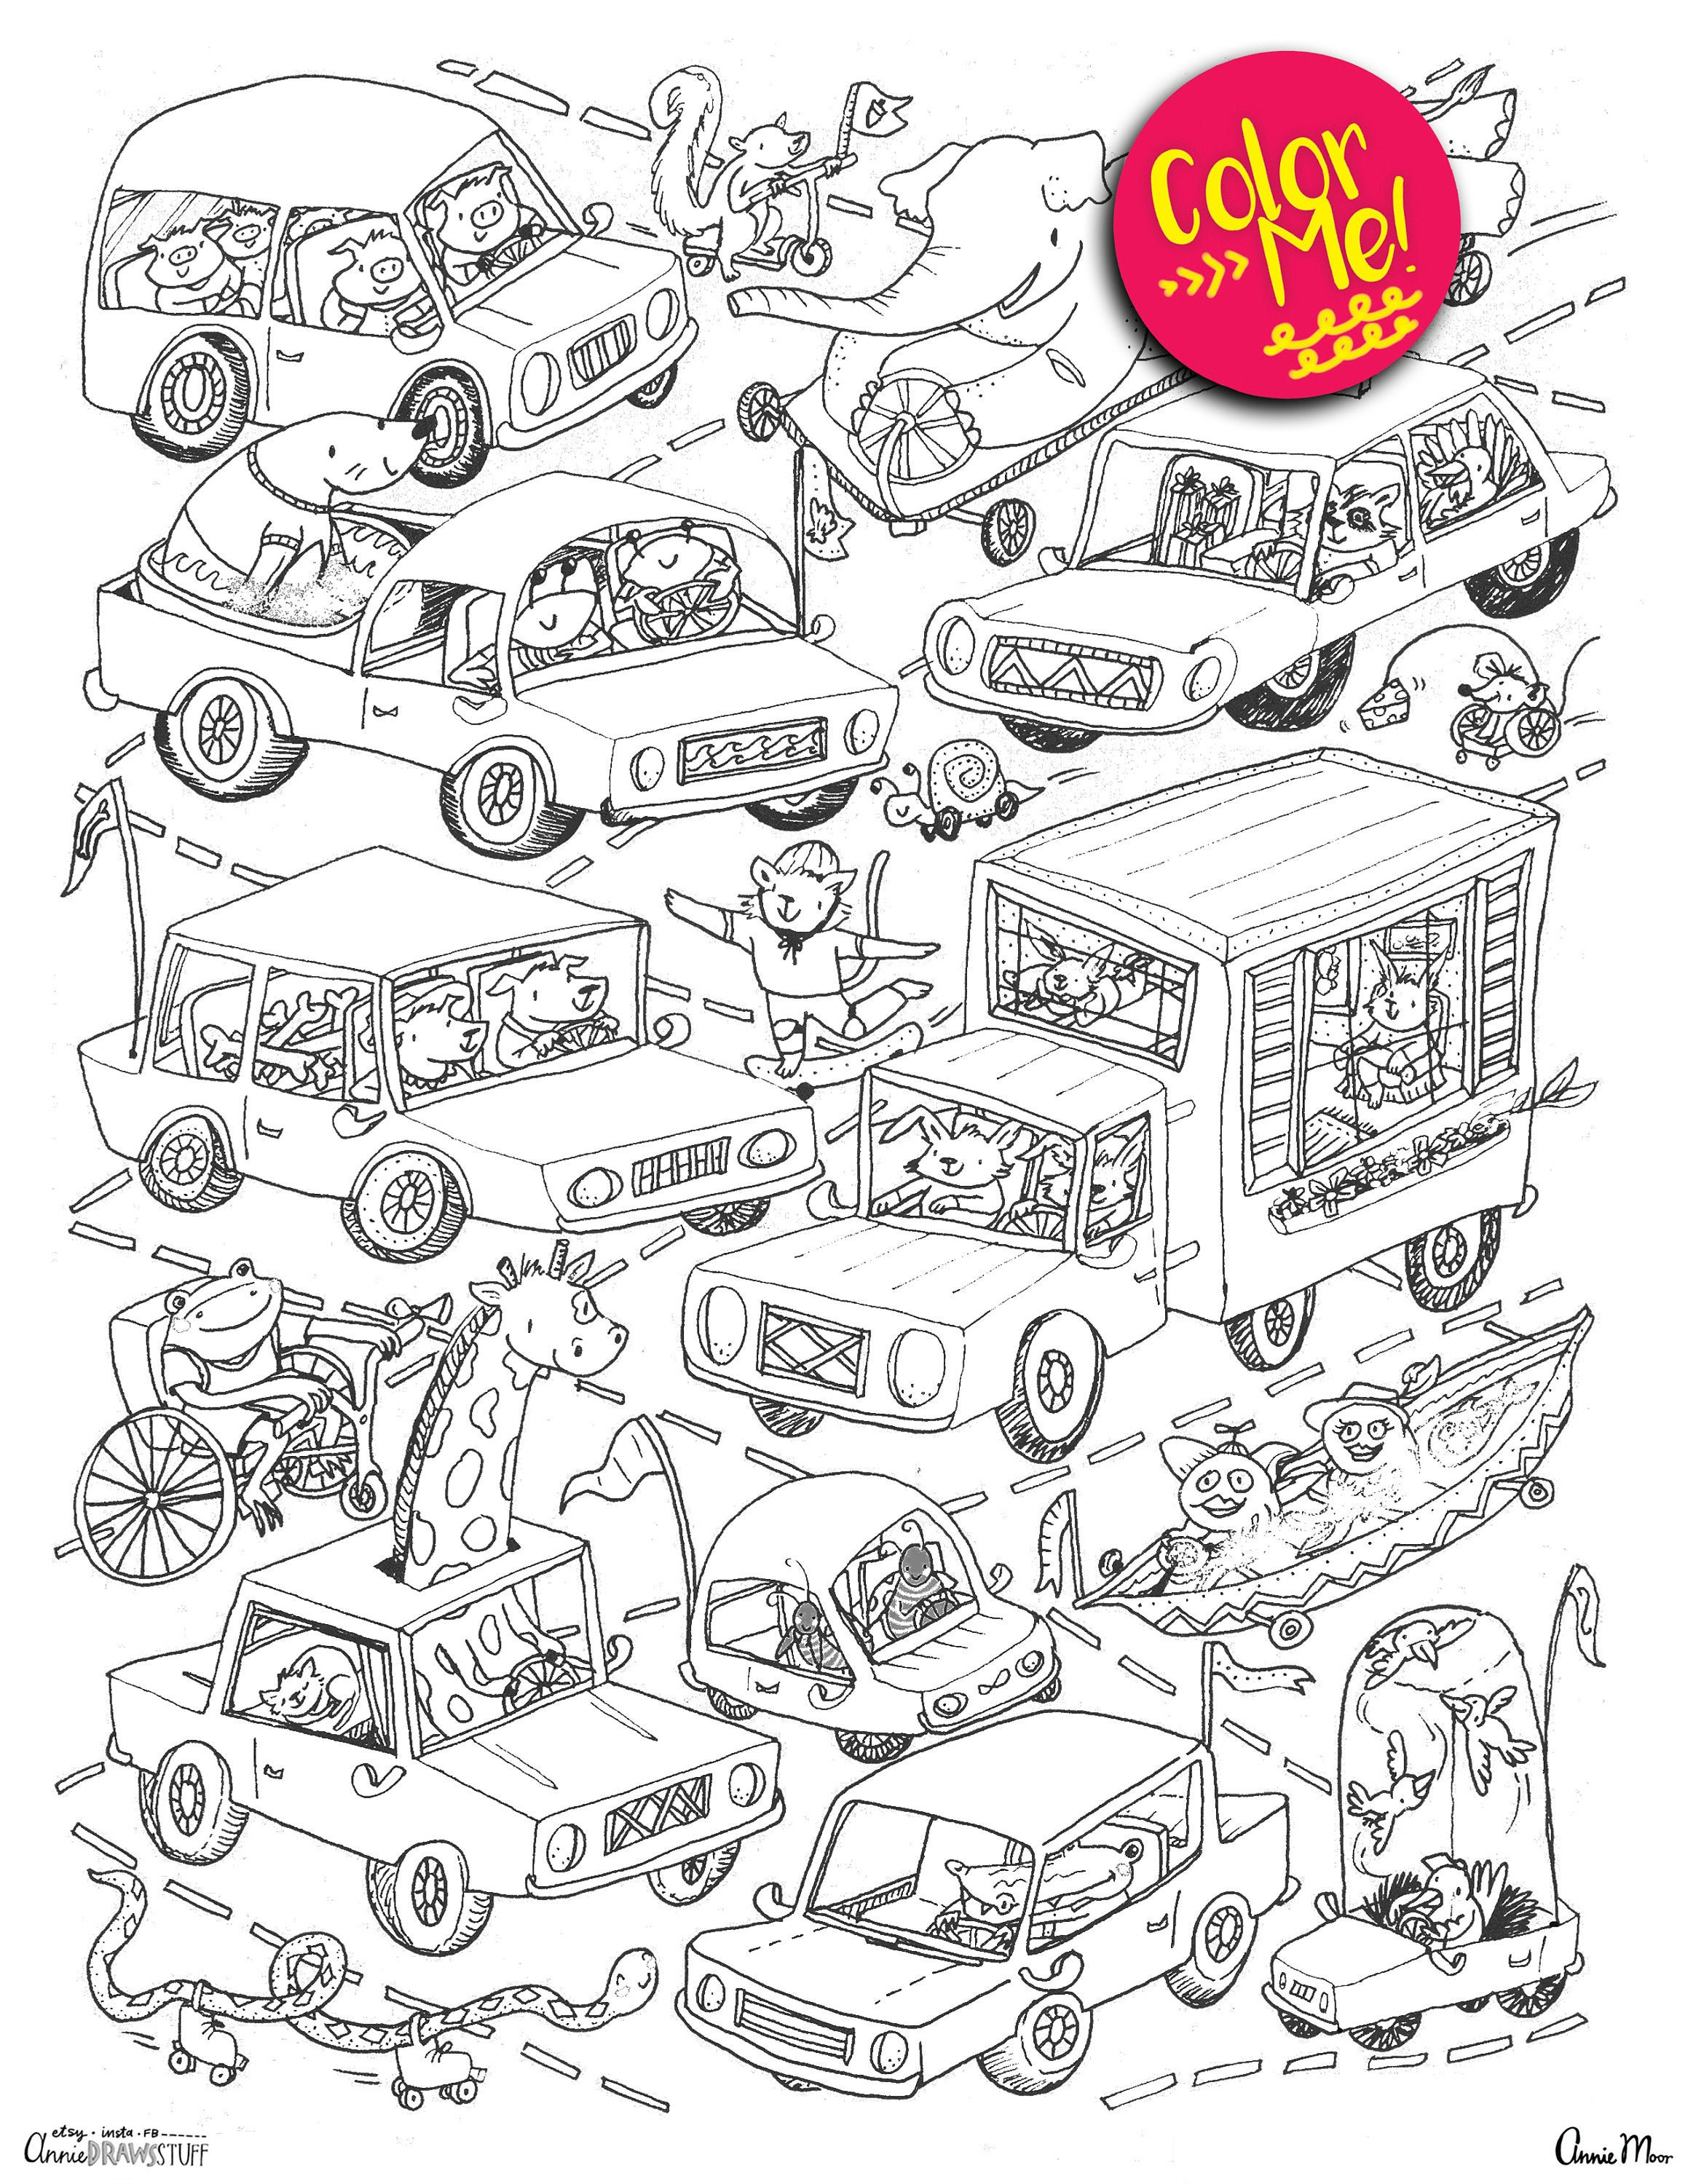 Animals On Vehicles Coloring Book For Kids (Ages 4-8): Original